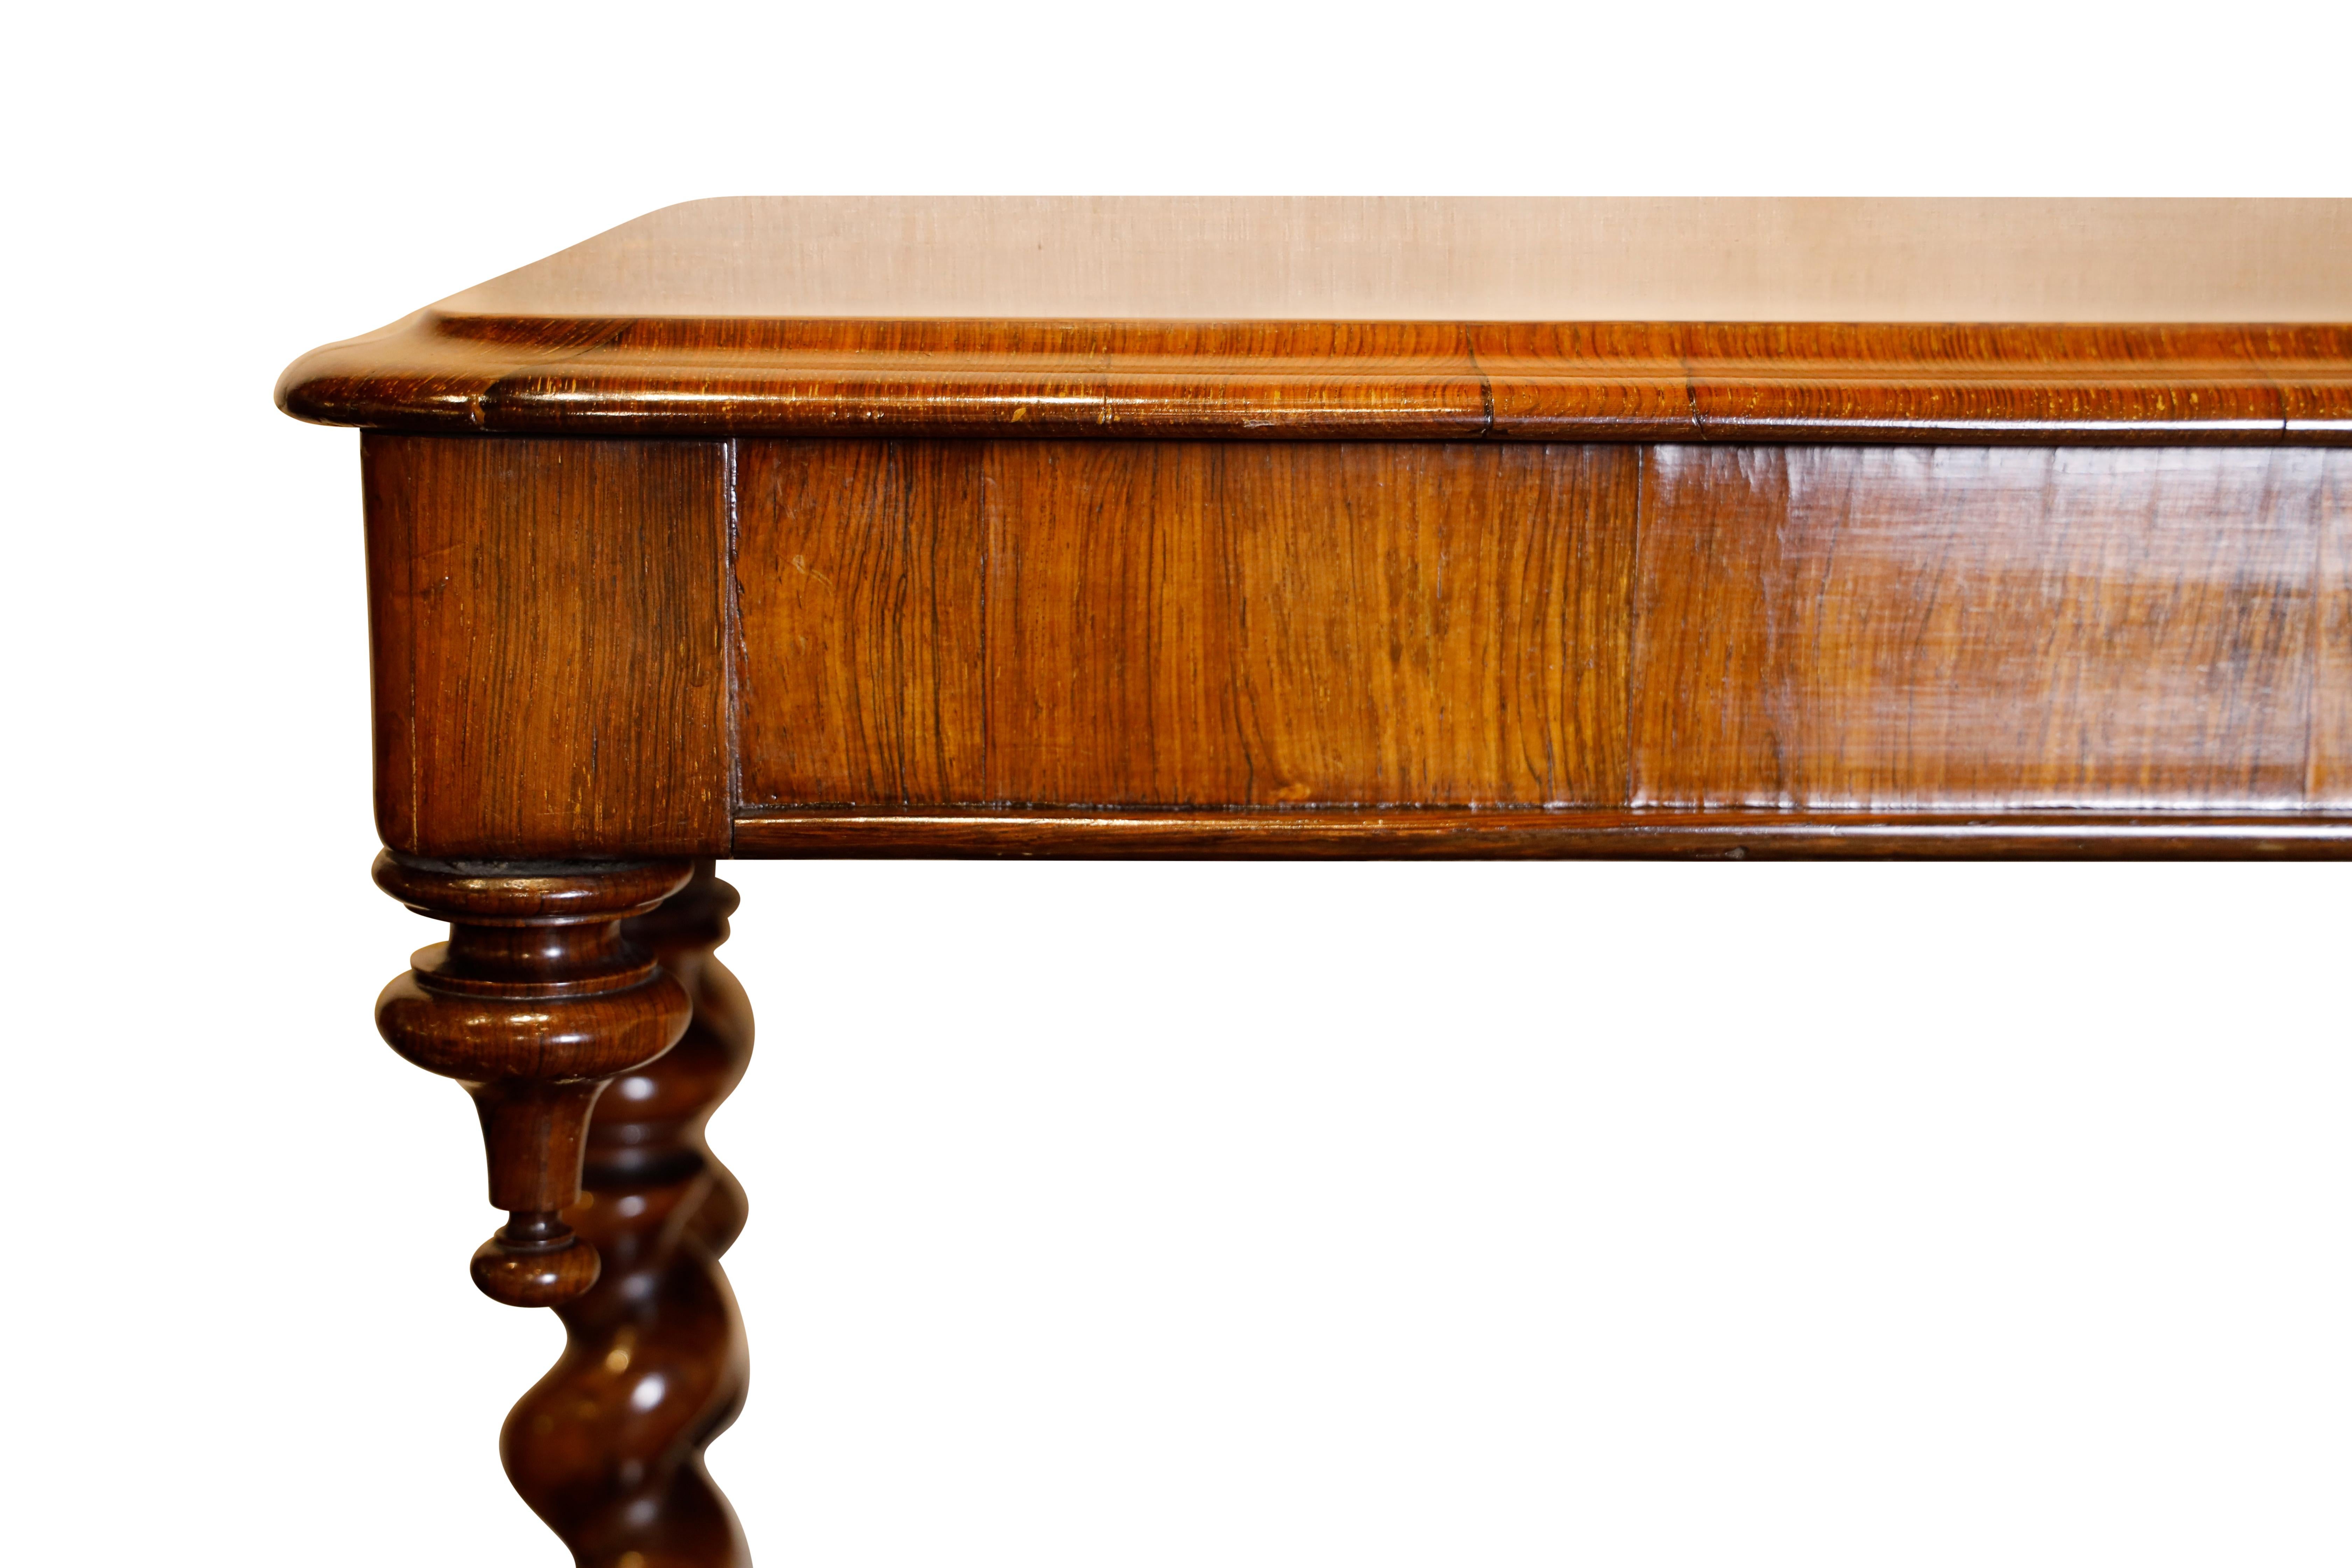 Regency rosewood library table with turned finials.  Barley twist supports with platform and brass castors, connected by barley twist and turned stretchers.